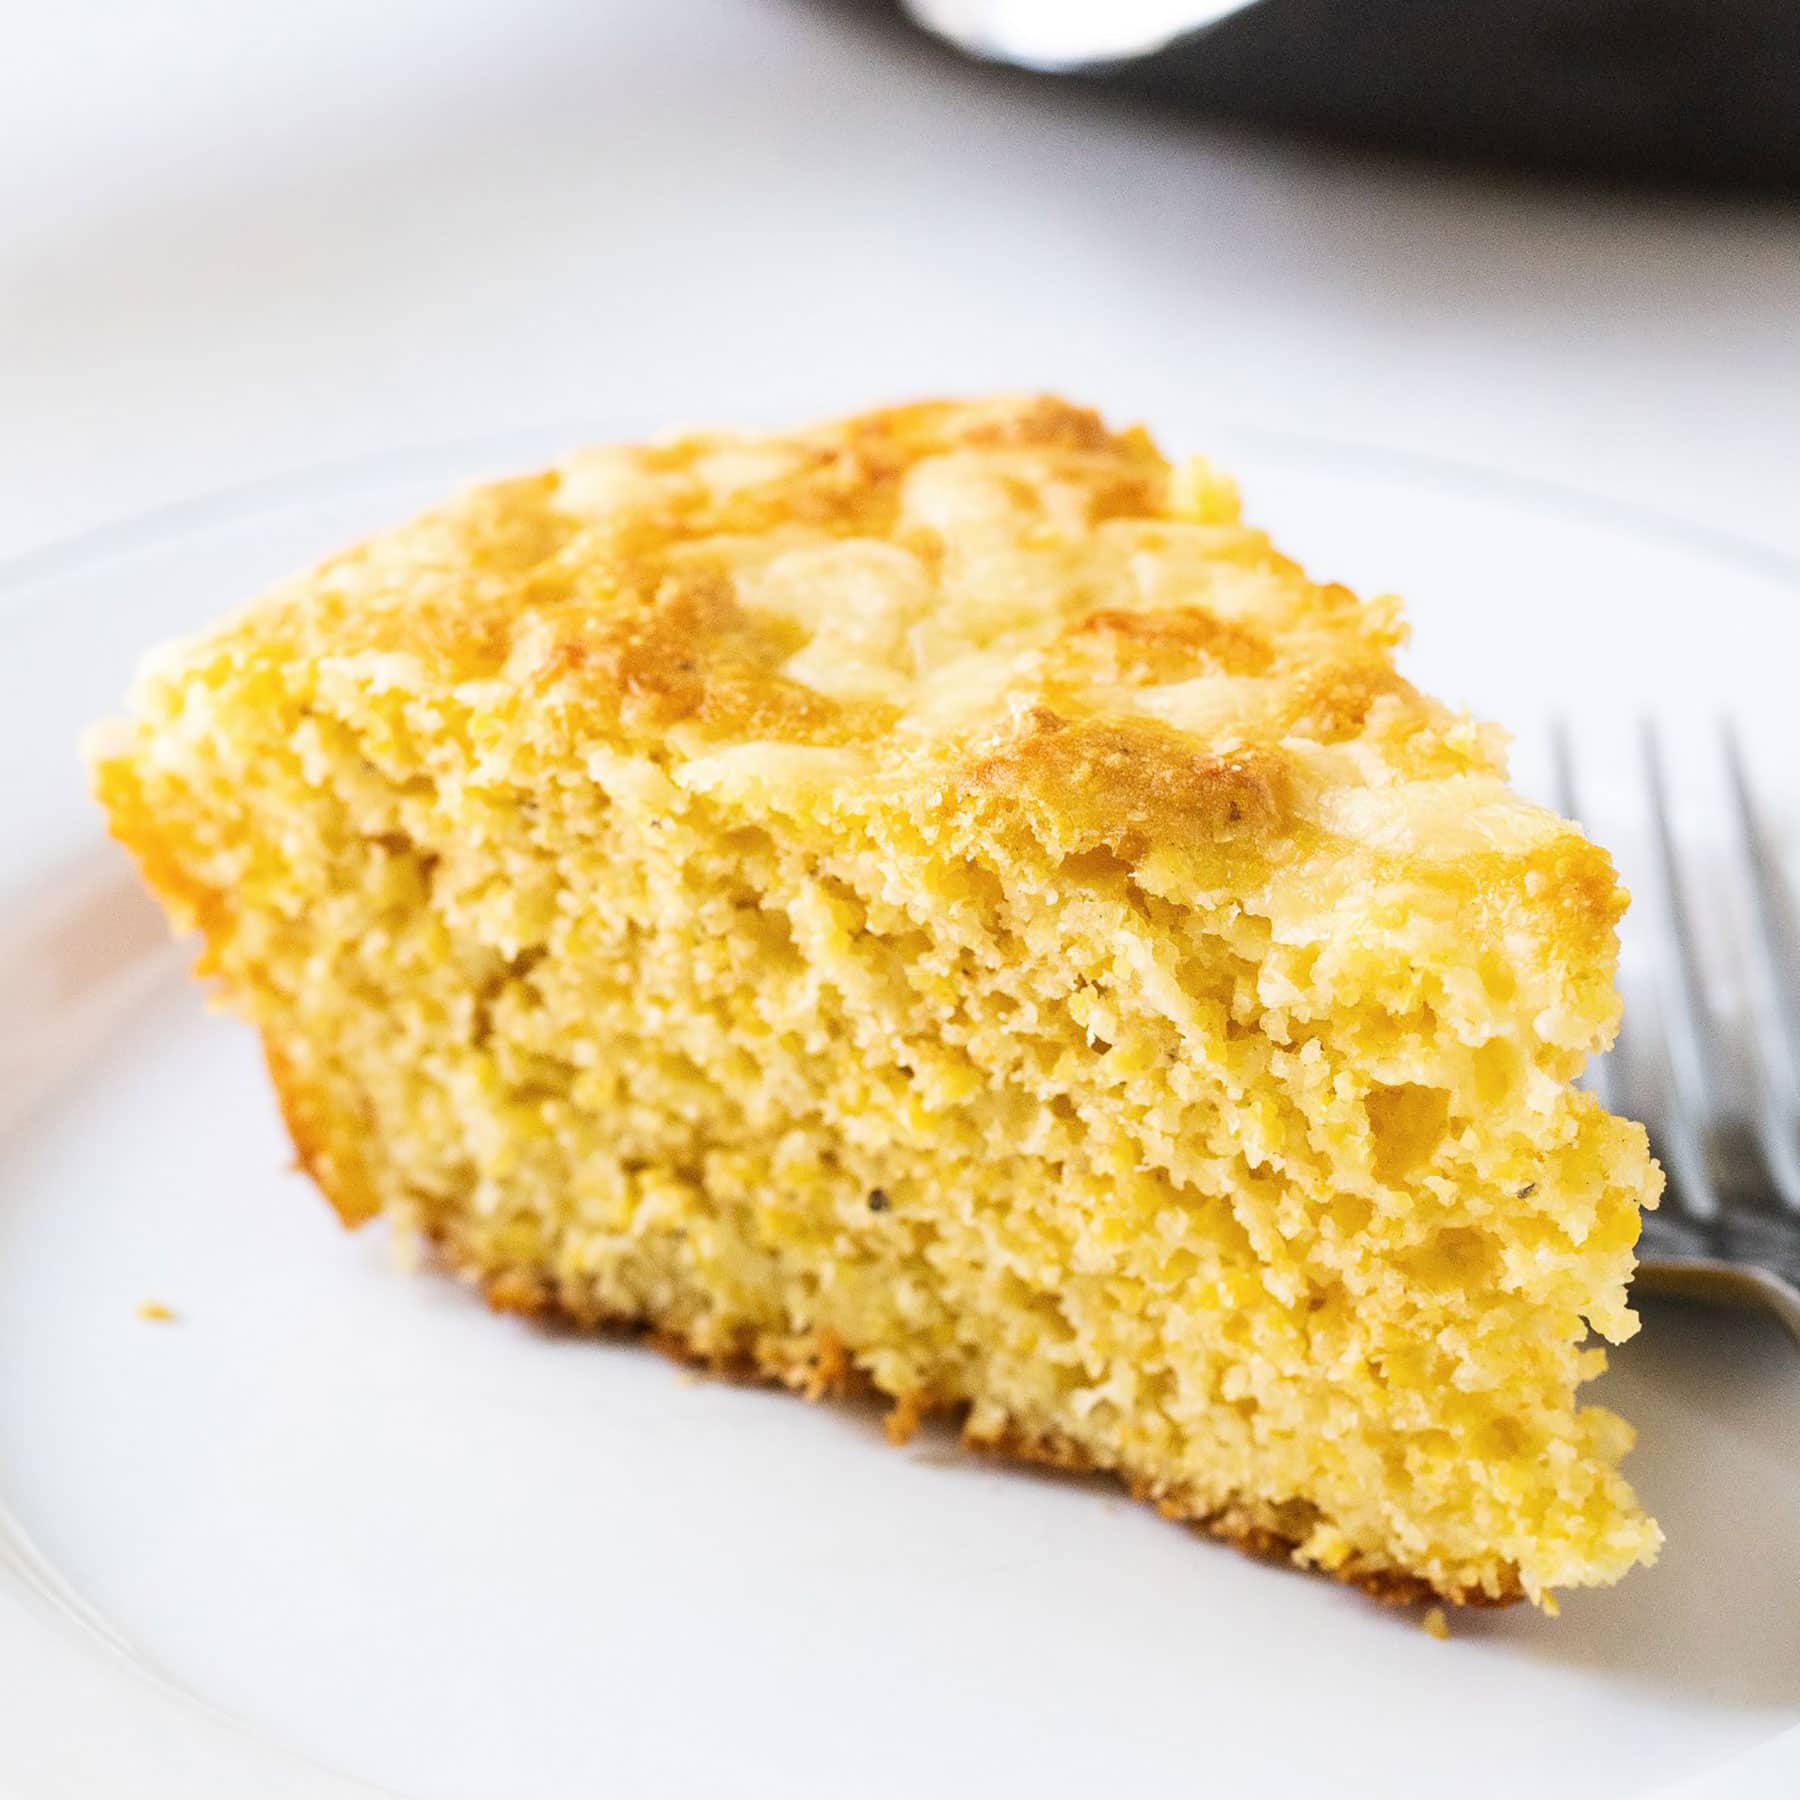 Cheesy Skillet Cornbread is ultra moist, tender, and loaded with cheddar cheese. It can be made in the oven or the grill, making it he perfect summer barbecue recipe!